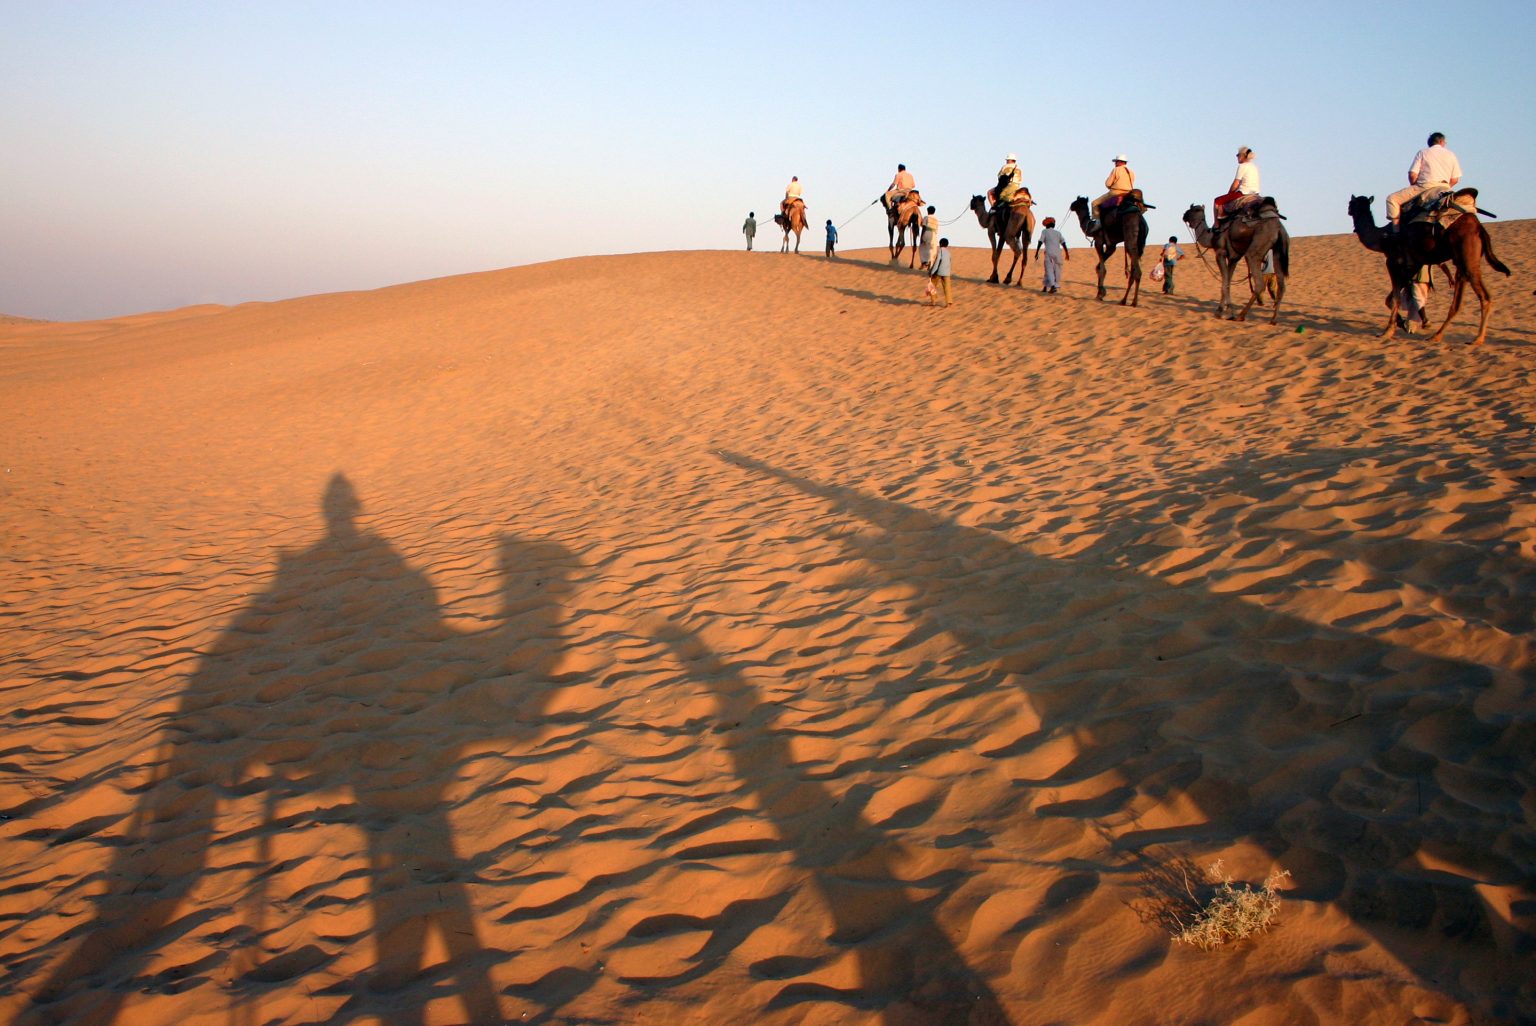 rajasthan tourism contact number in chennai